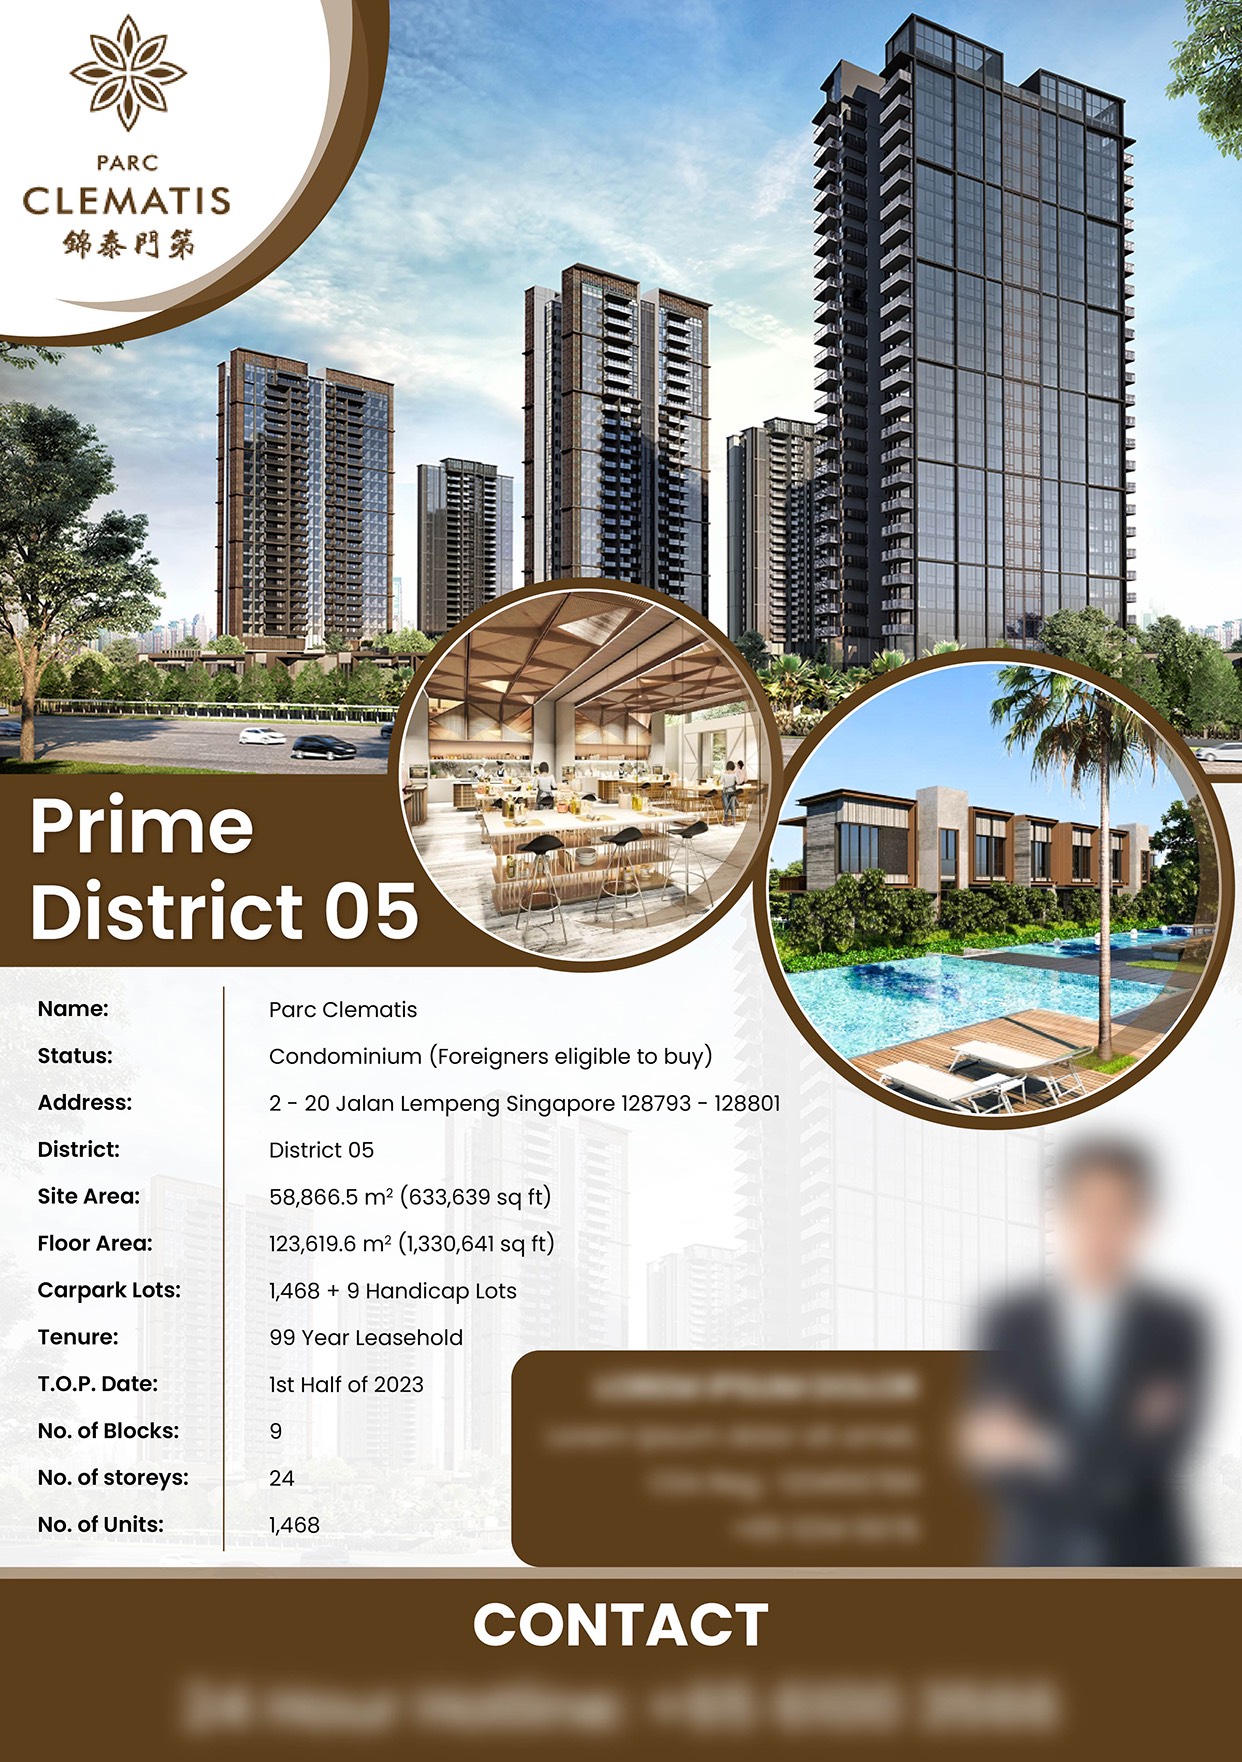 Property Flyer Design Services in Singapore for Real Estate Agent